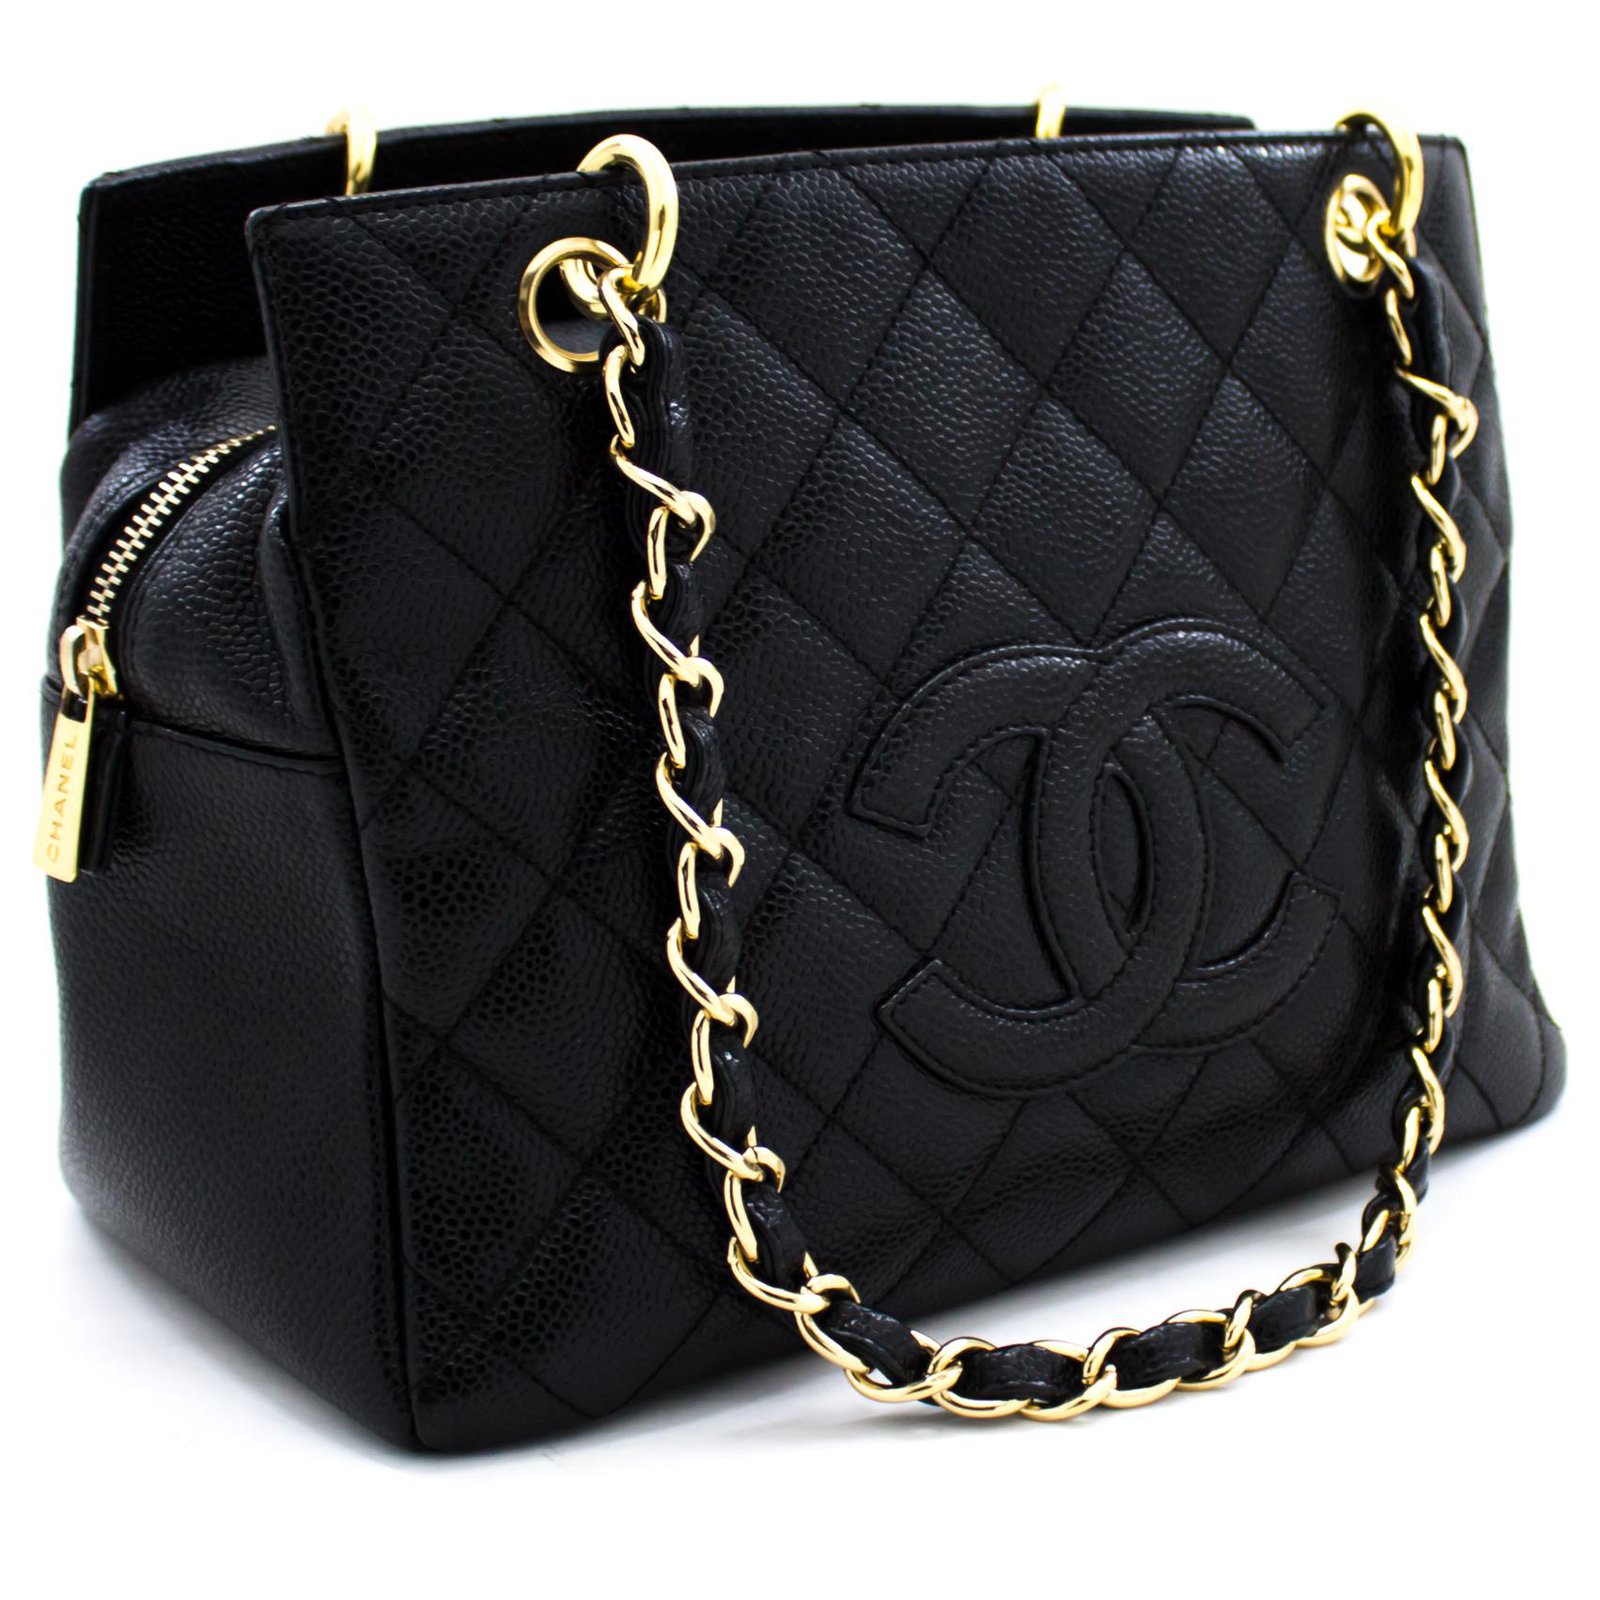 CHANEL Caviar Chain Shoulder Bag Shopping Tote Black Quilted Purse